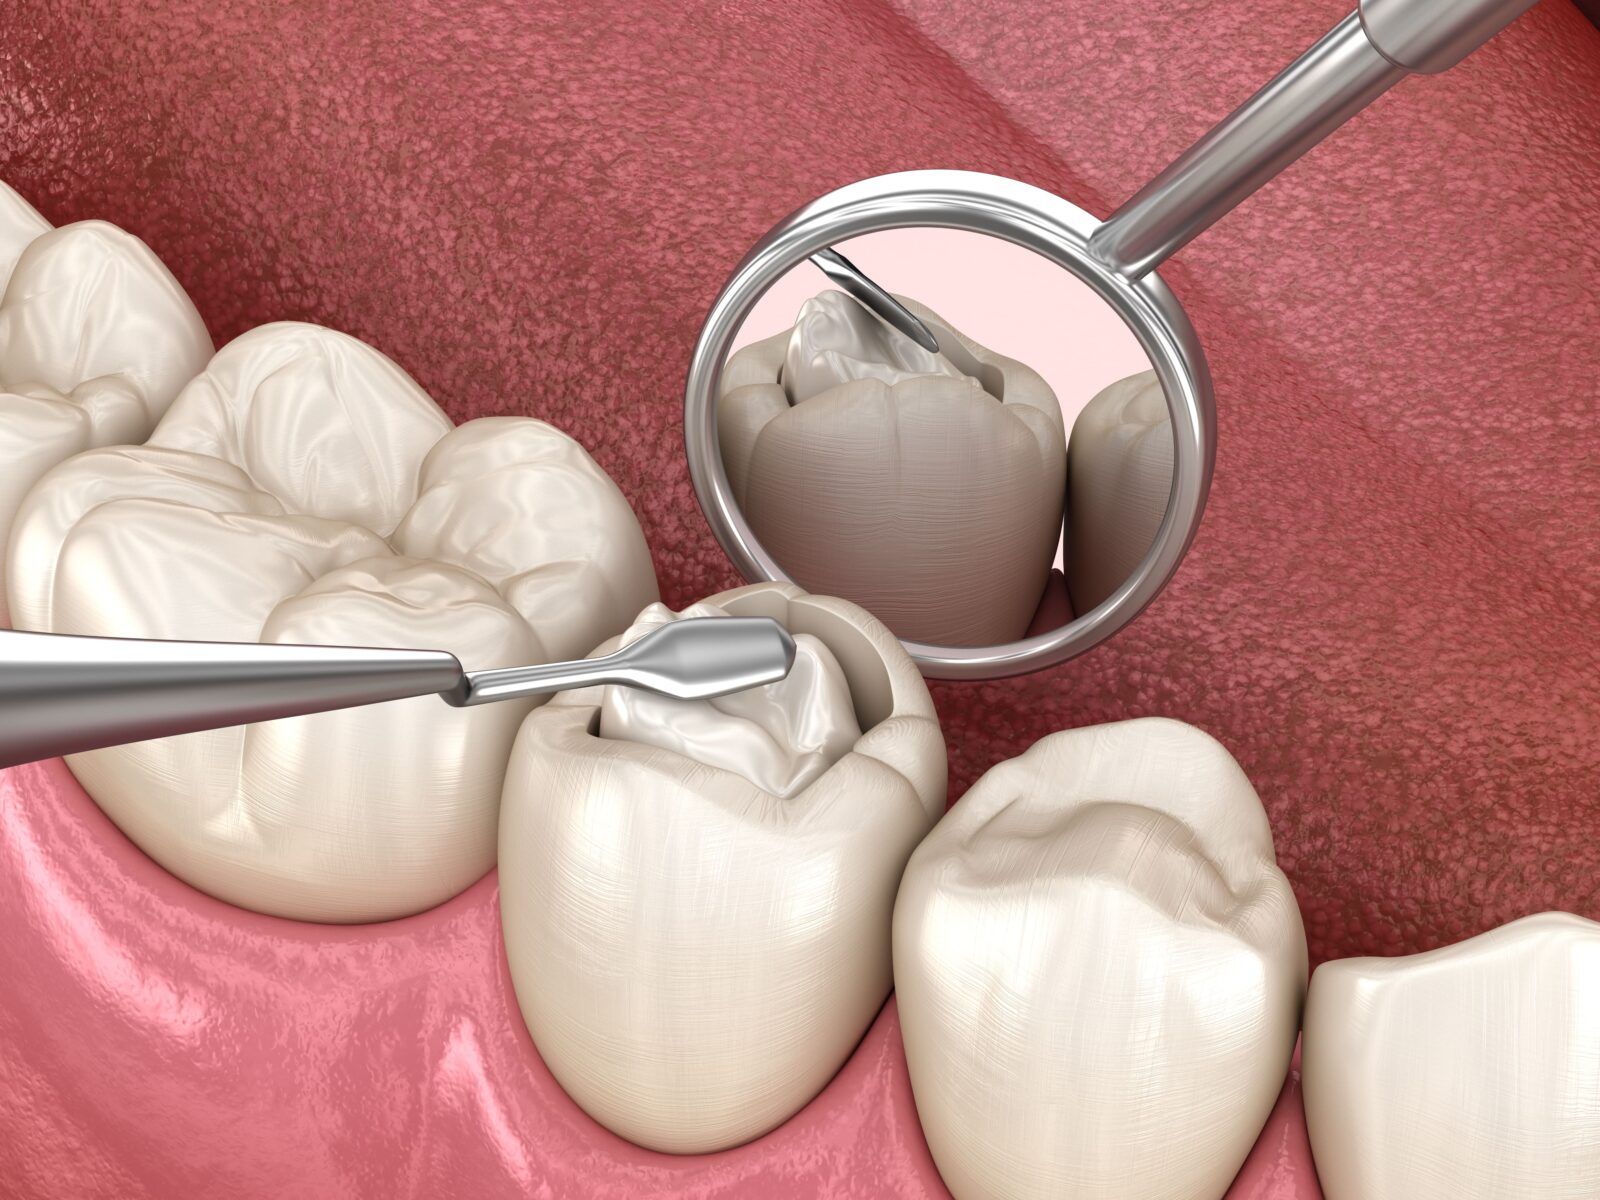 dental filling being placed in tooth